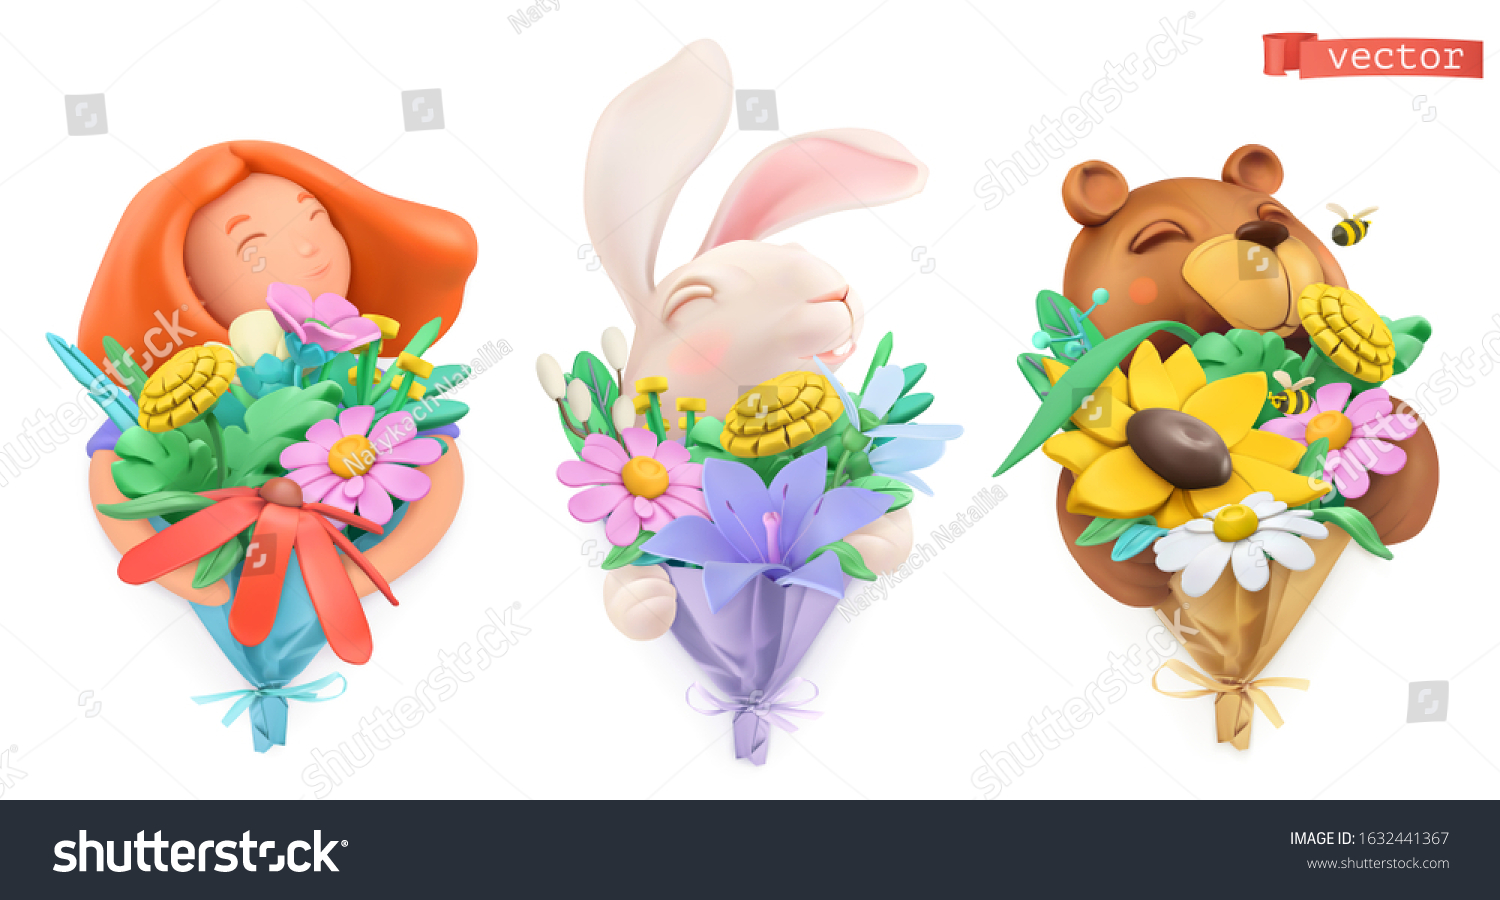 SVG of Funny characters with bouquet of flowers. Girl, easter bunny, bear. Plasticine art objects. Spring and summer 3d vector icon set svg